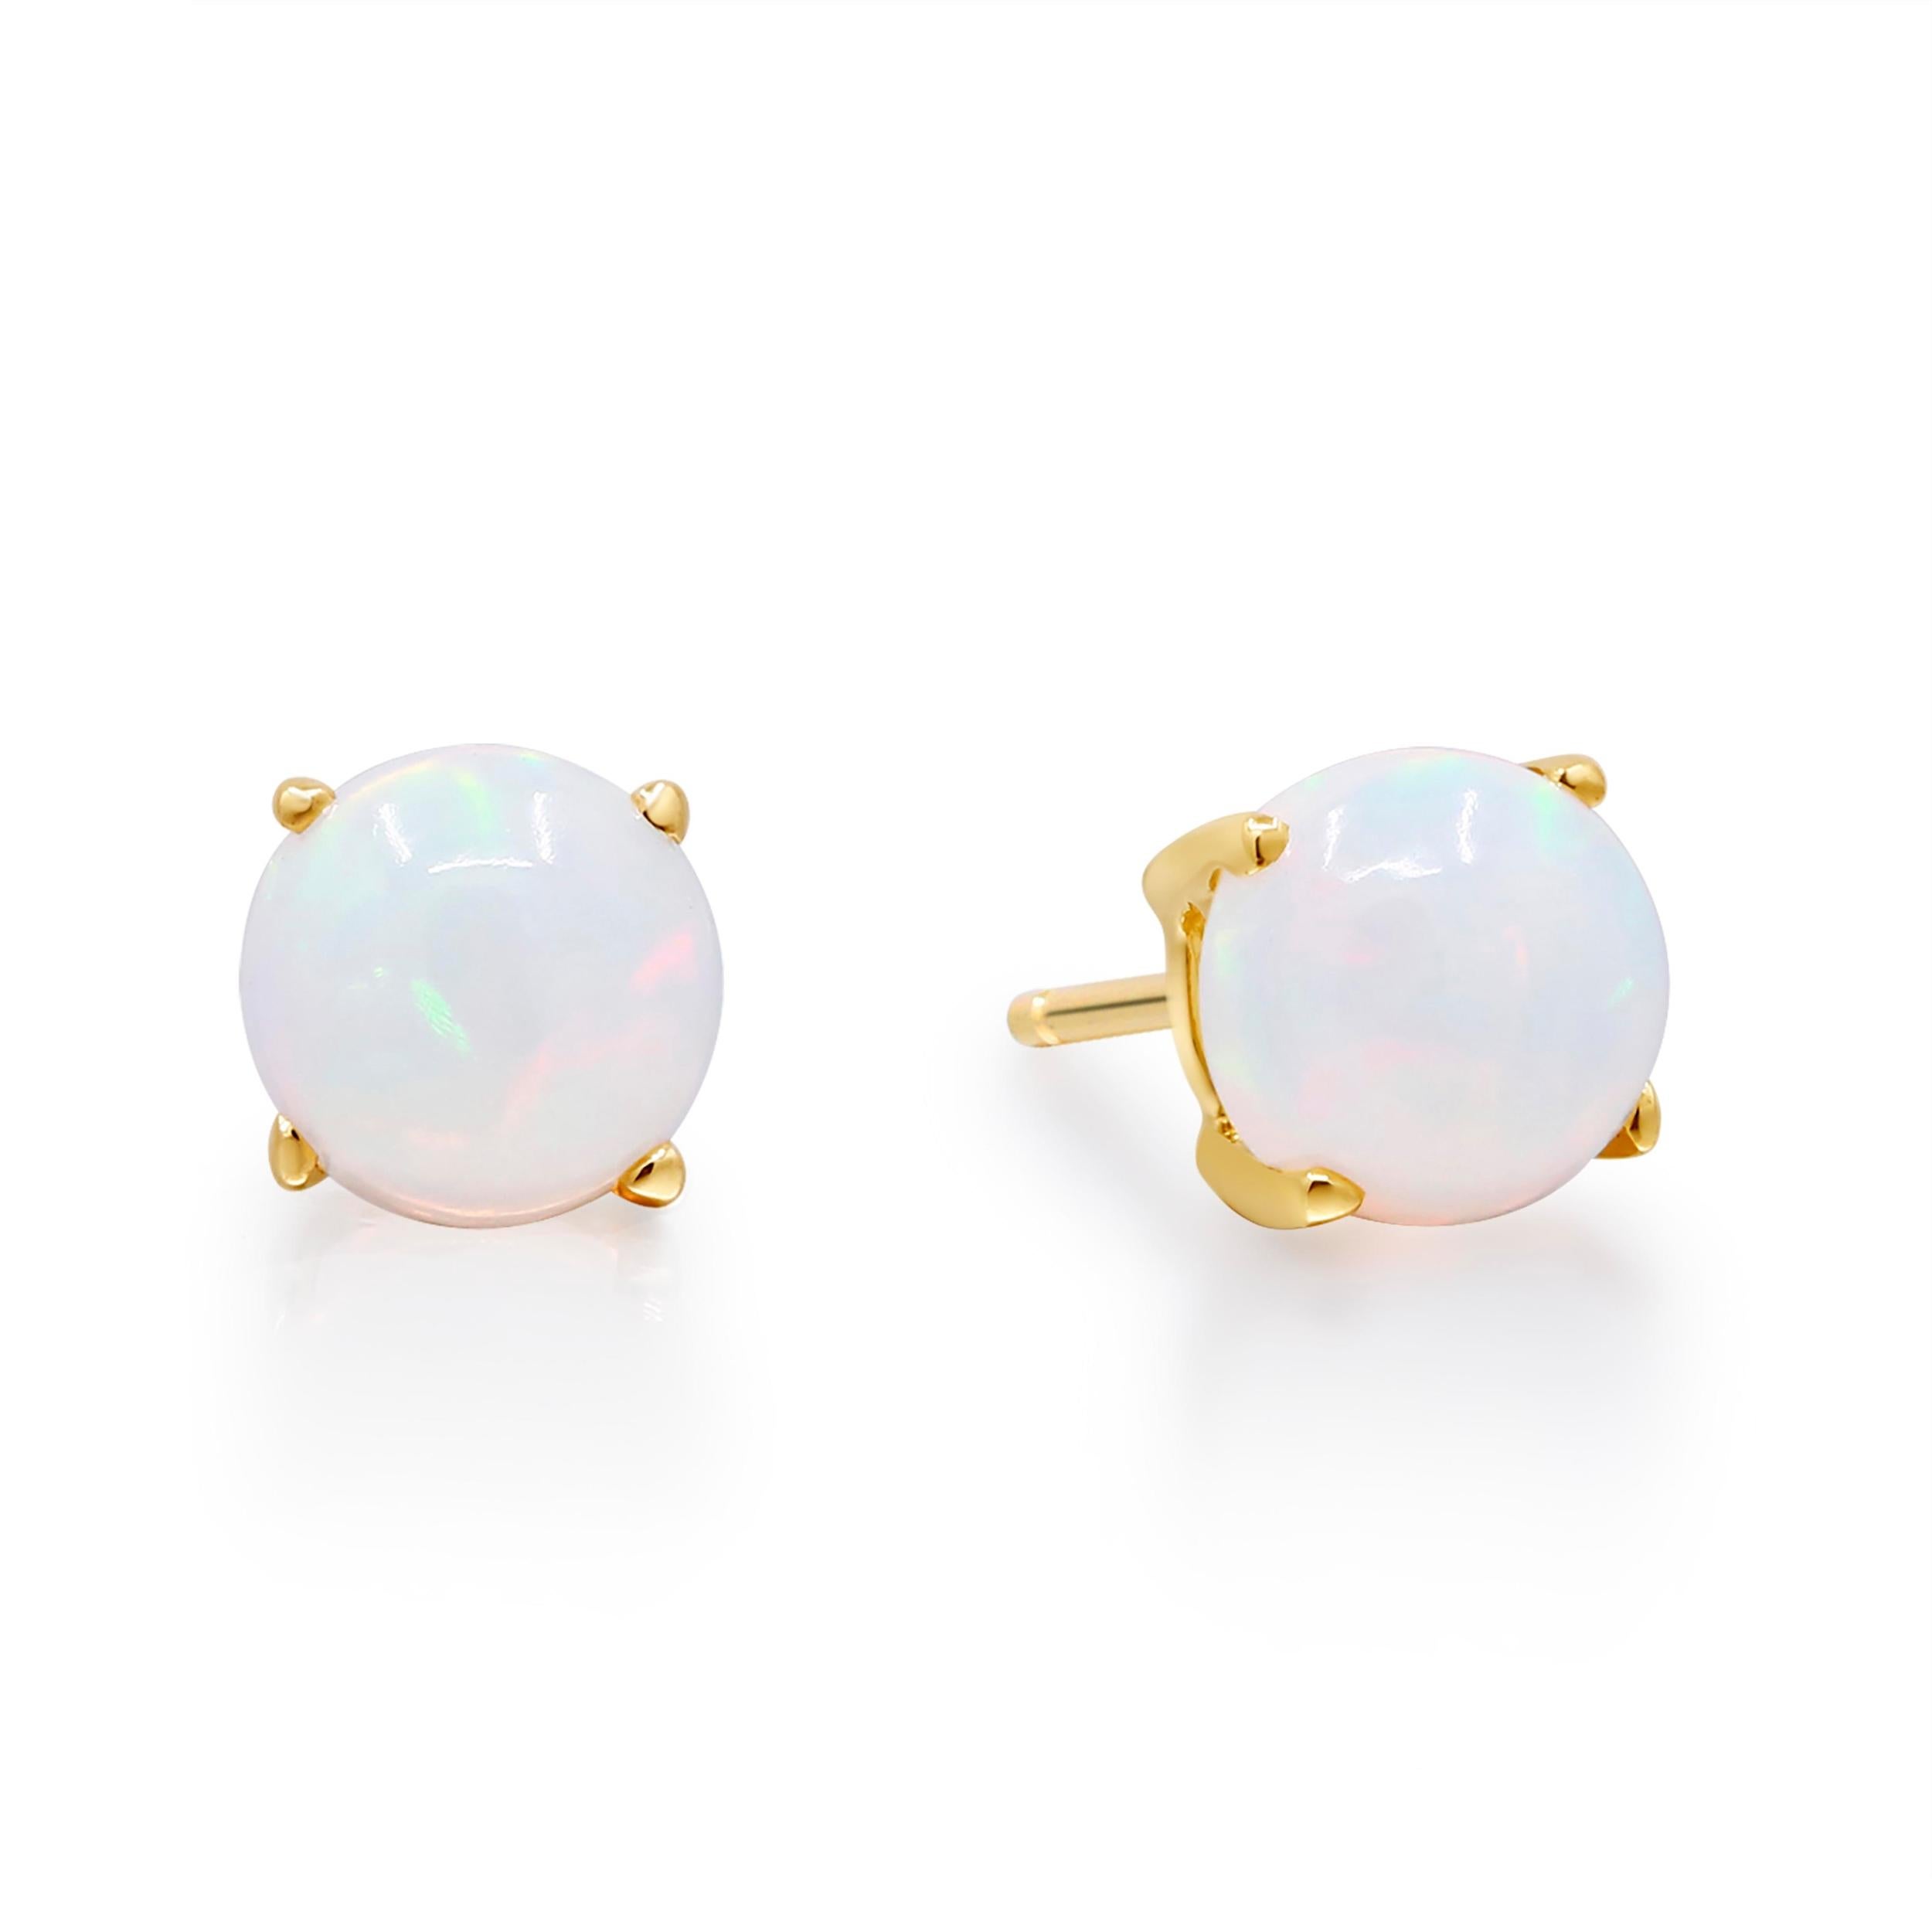 Decorate yourself in elegance with this Earring is crafted from 14-karat Yellow Gold by Gin & Grace Earring. This Earring is made up of 6.0 mm Round-cut (2 pcs) 1.22 carat Ethiopian Opal. This Earring is weight 1.10 grams. This delicate Earring is